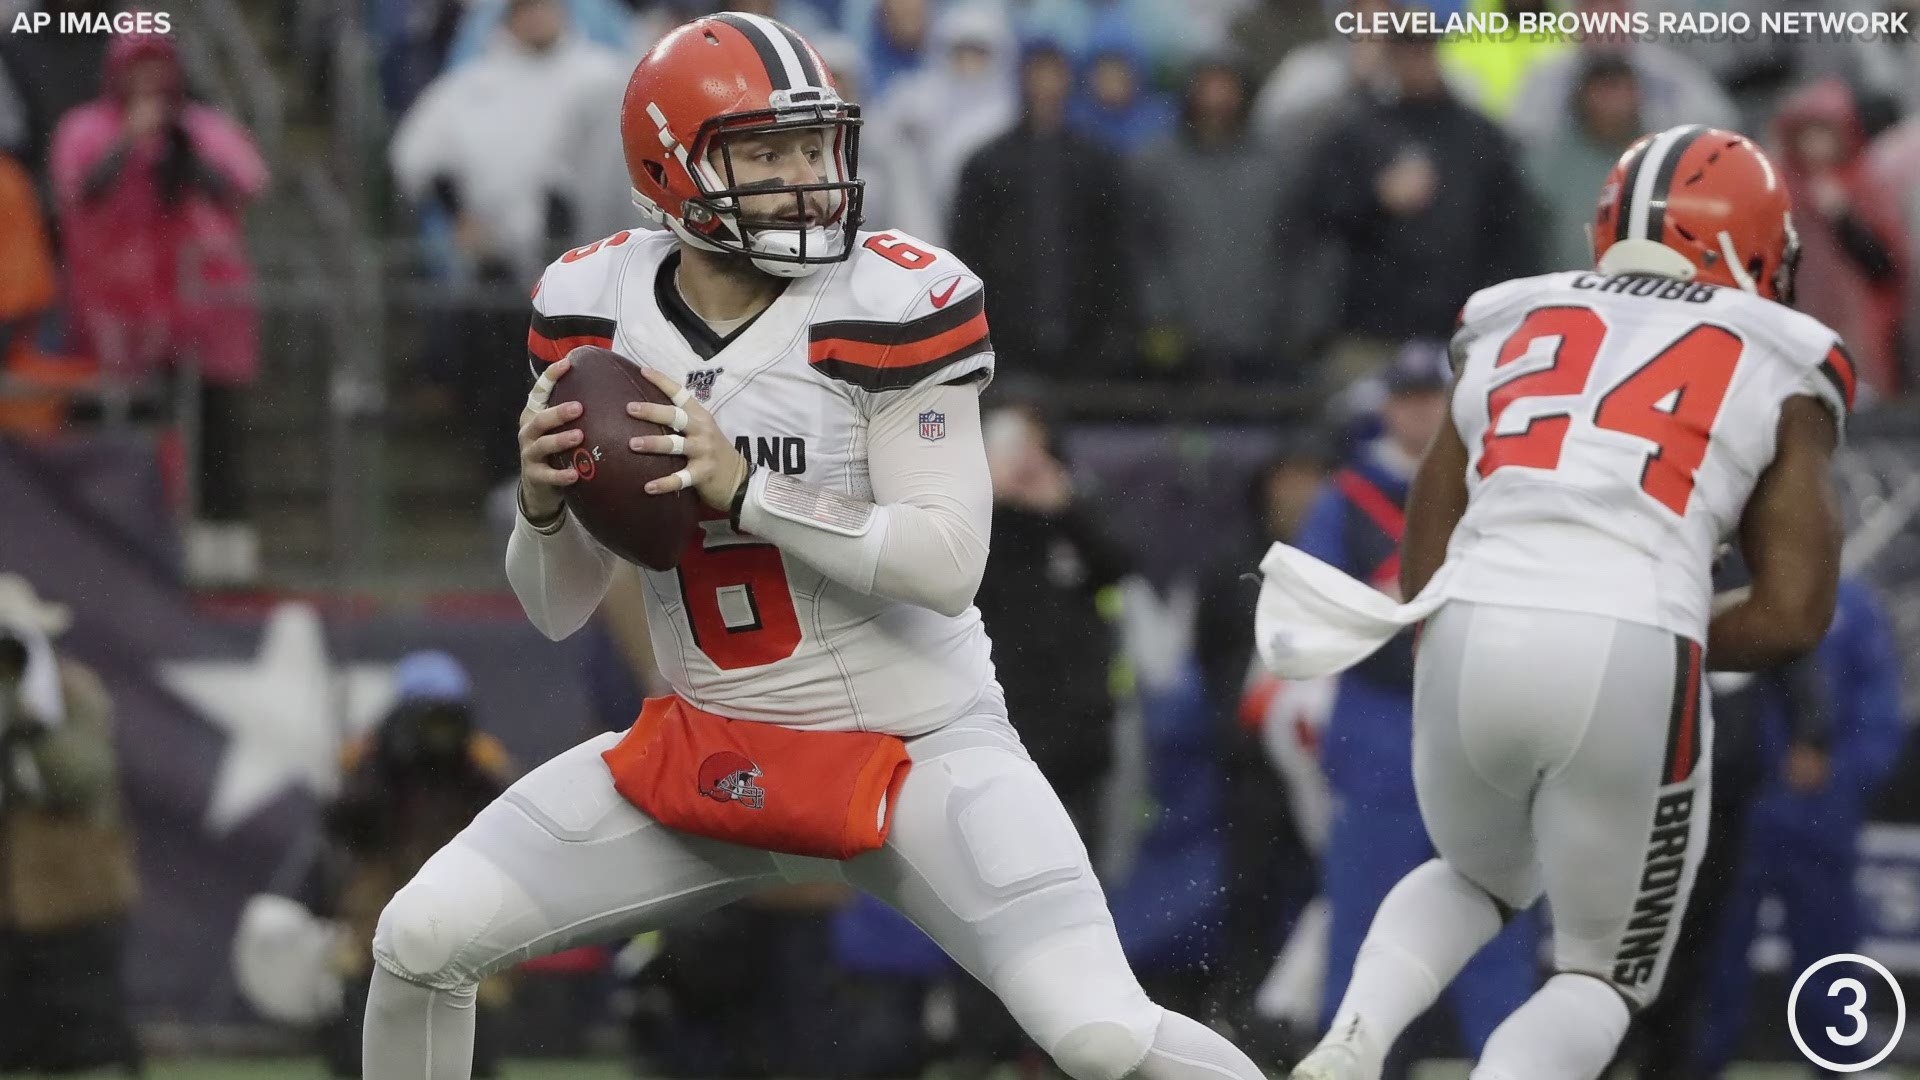 Another pick for Baker.  Cleveland Browns quarterback Baker Mayfield threw one his most questionable interceptions vs. the New England Patriots on Sunday.